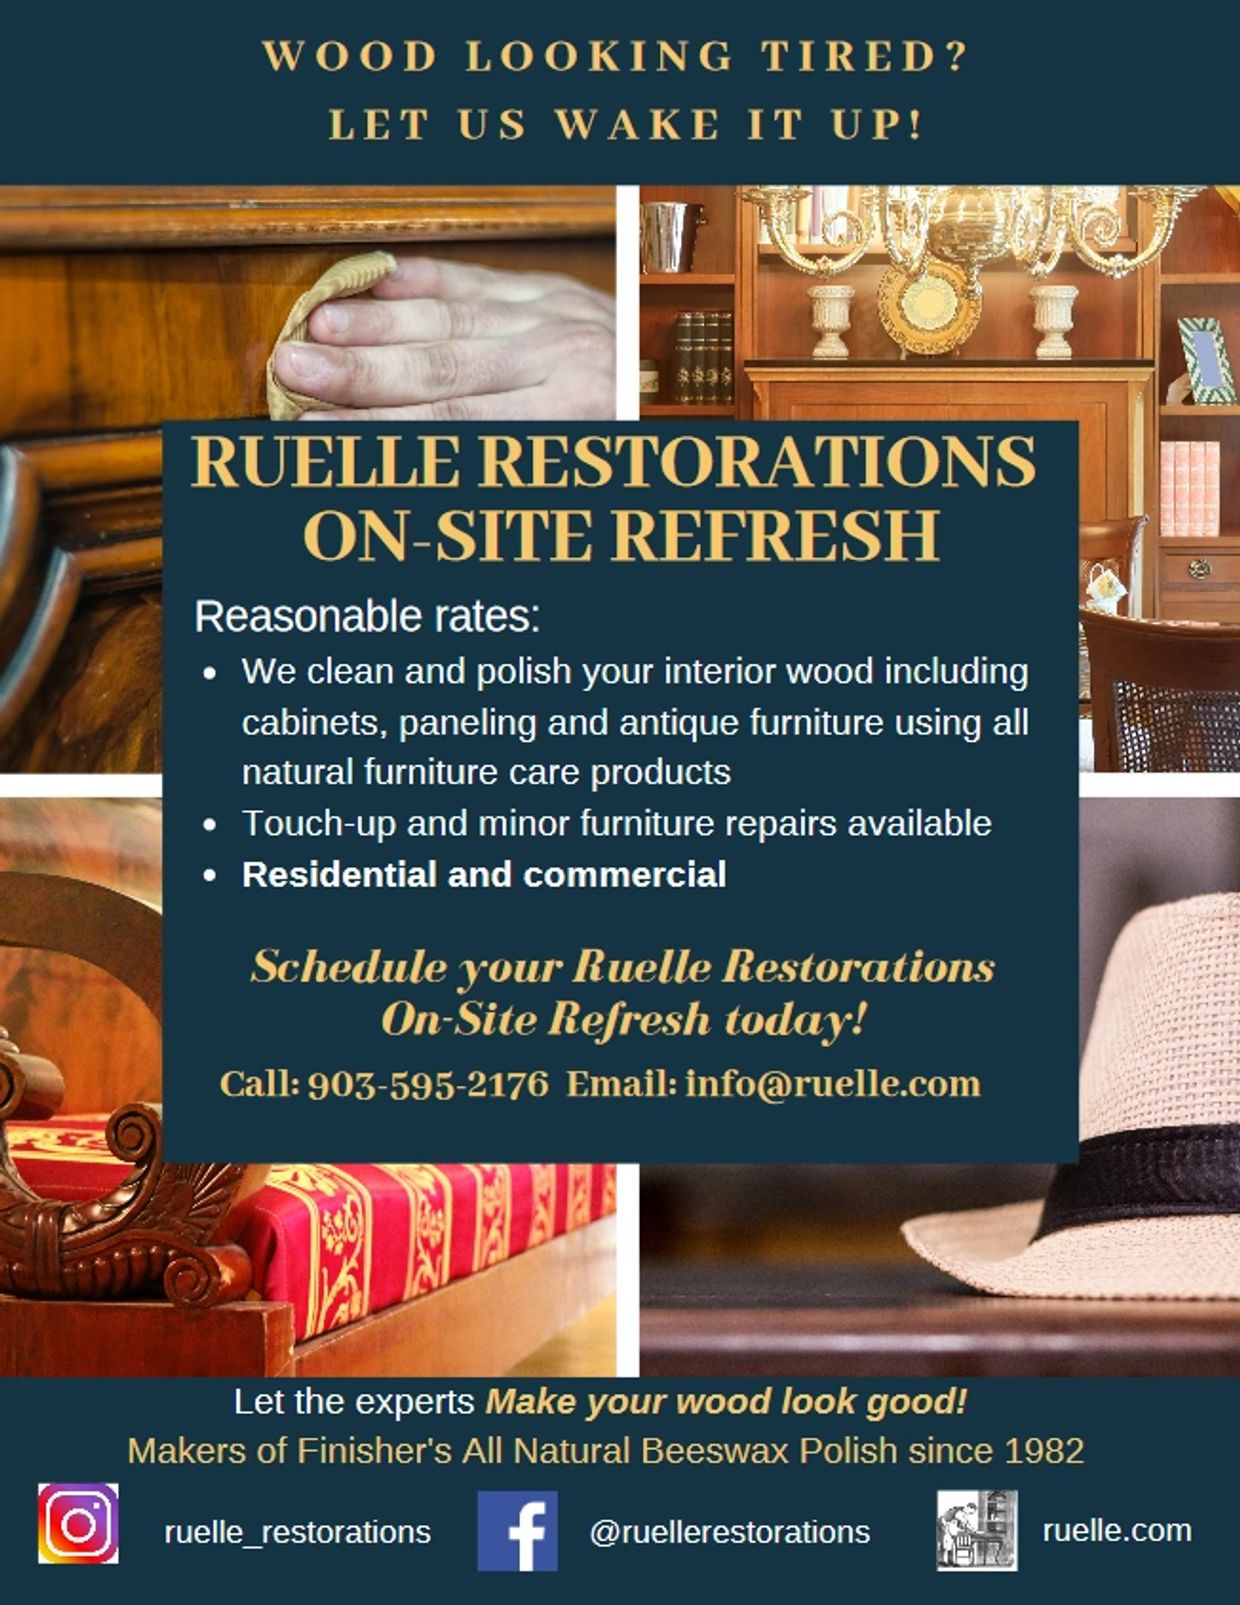 On-Site Refresh service description. We clean and polish interior wood,cabinets and furniture.